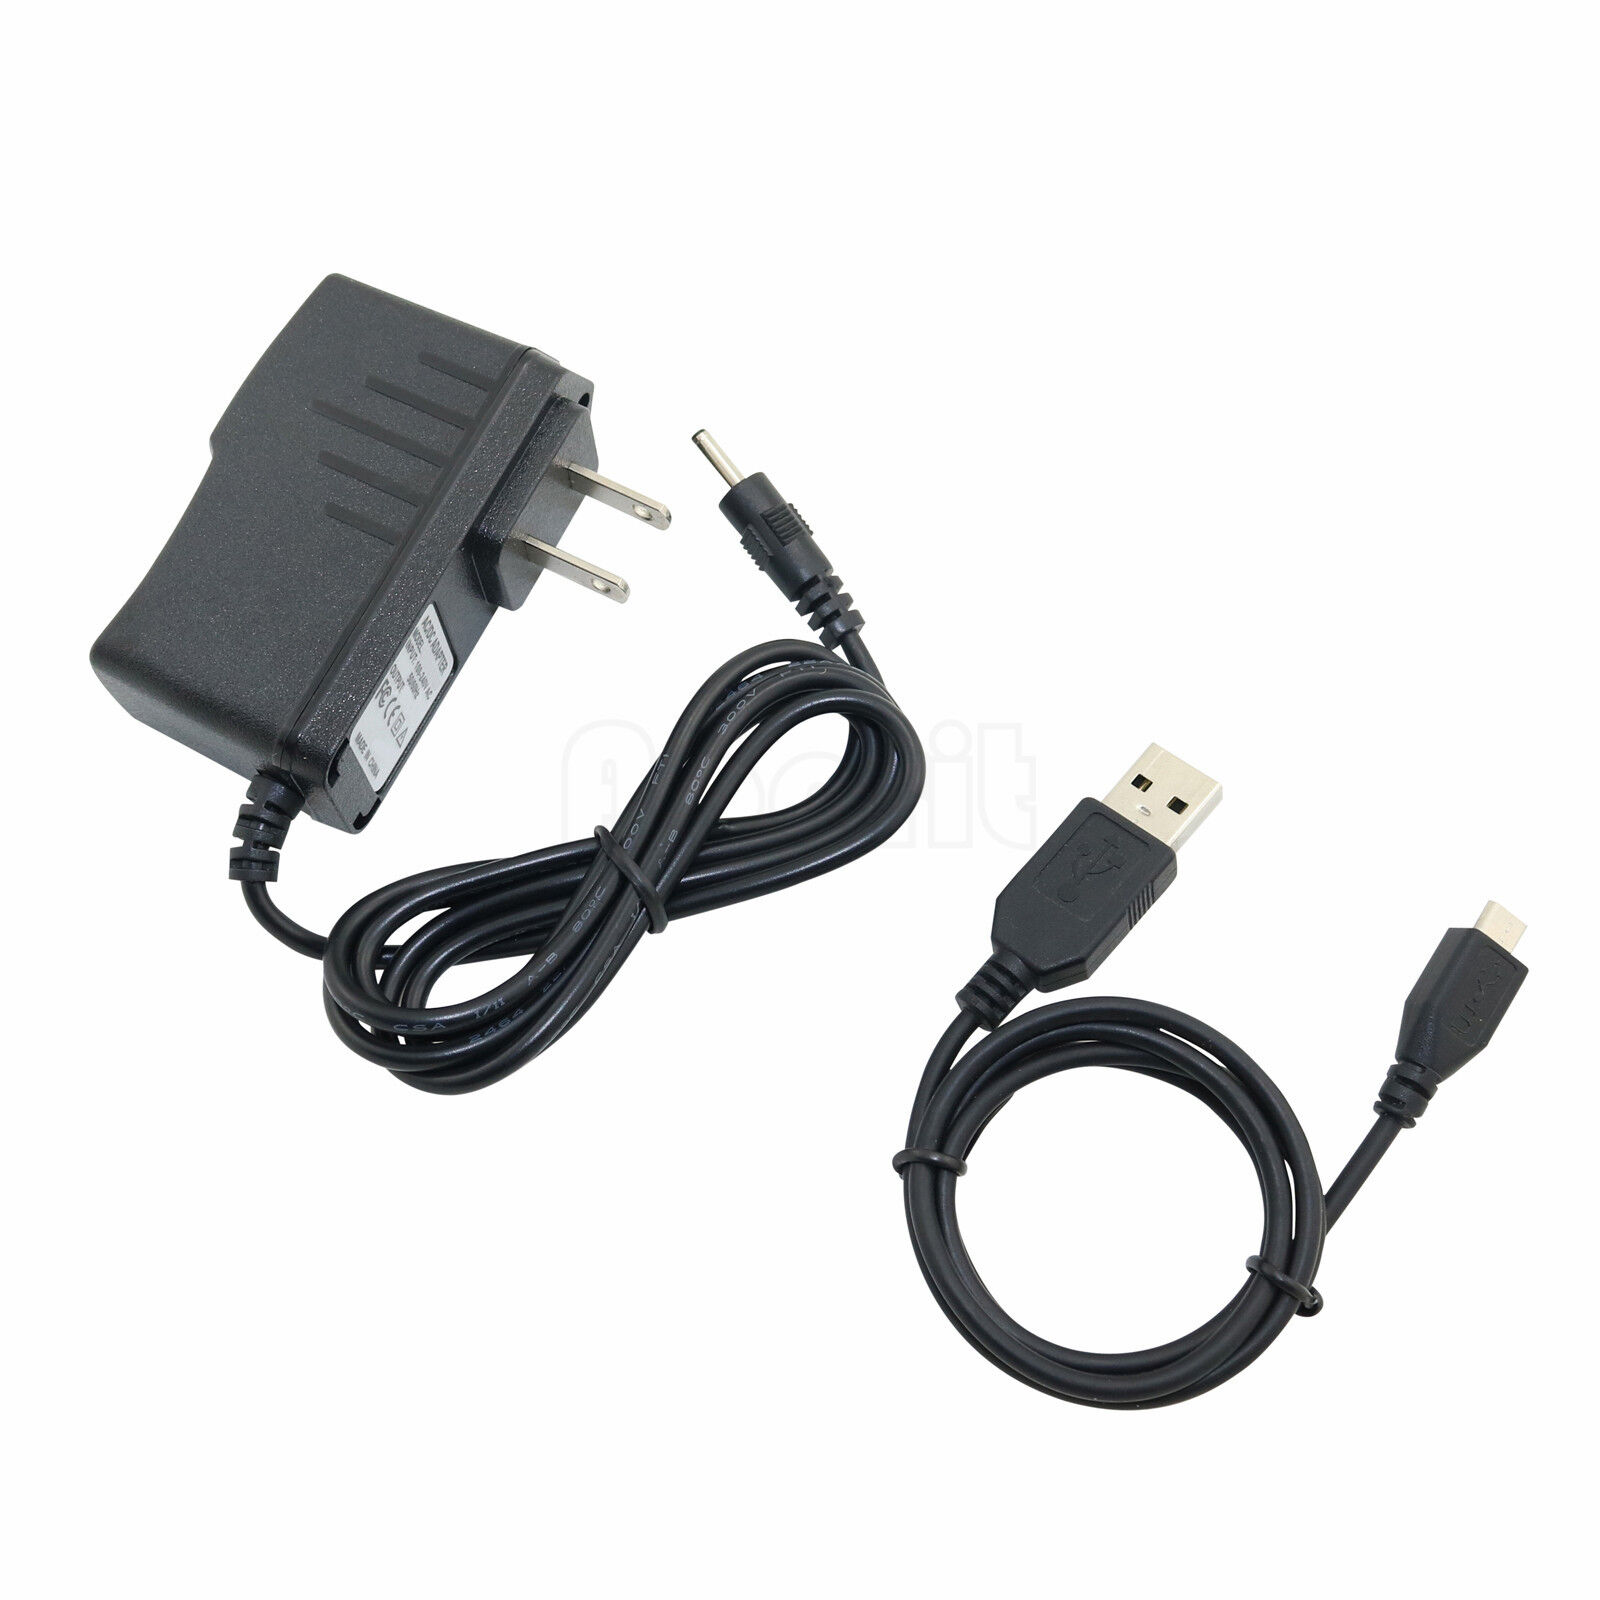 AC Adapter Power Charger + USB Cord for Nextbook Premium 10se NEXT10P12 Tablet AC Adapter Power Charger + USB Cord for - Click Image to Close